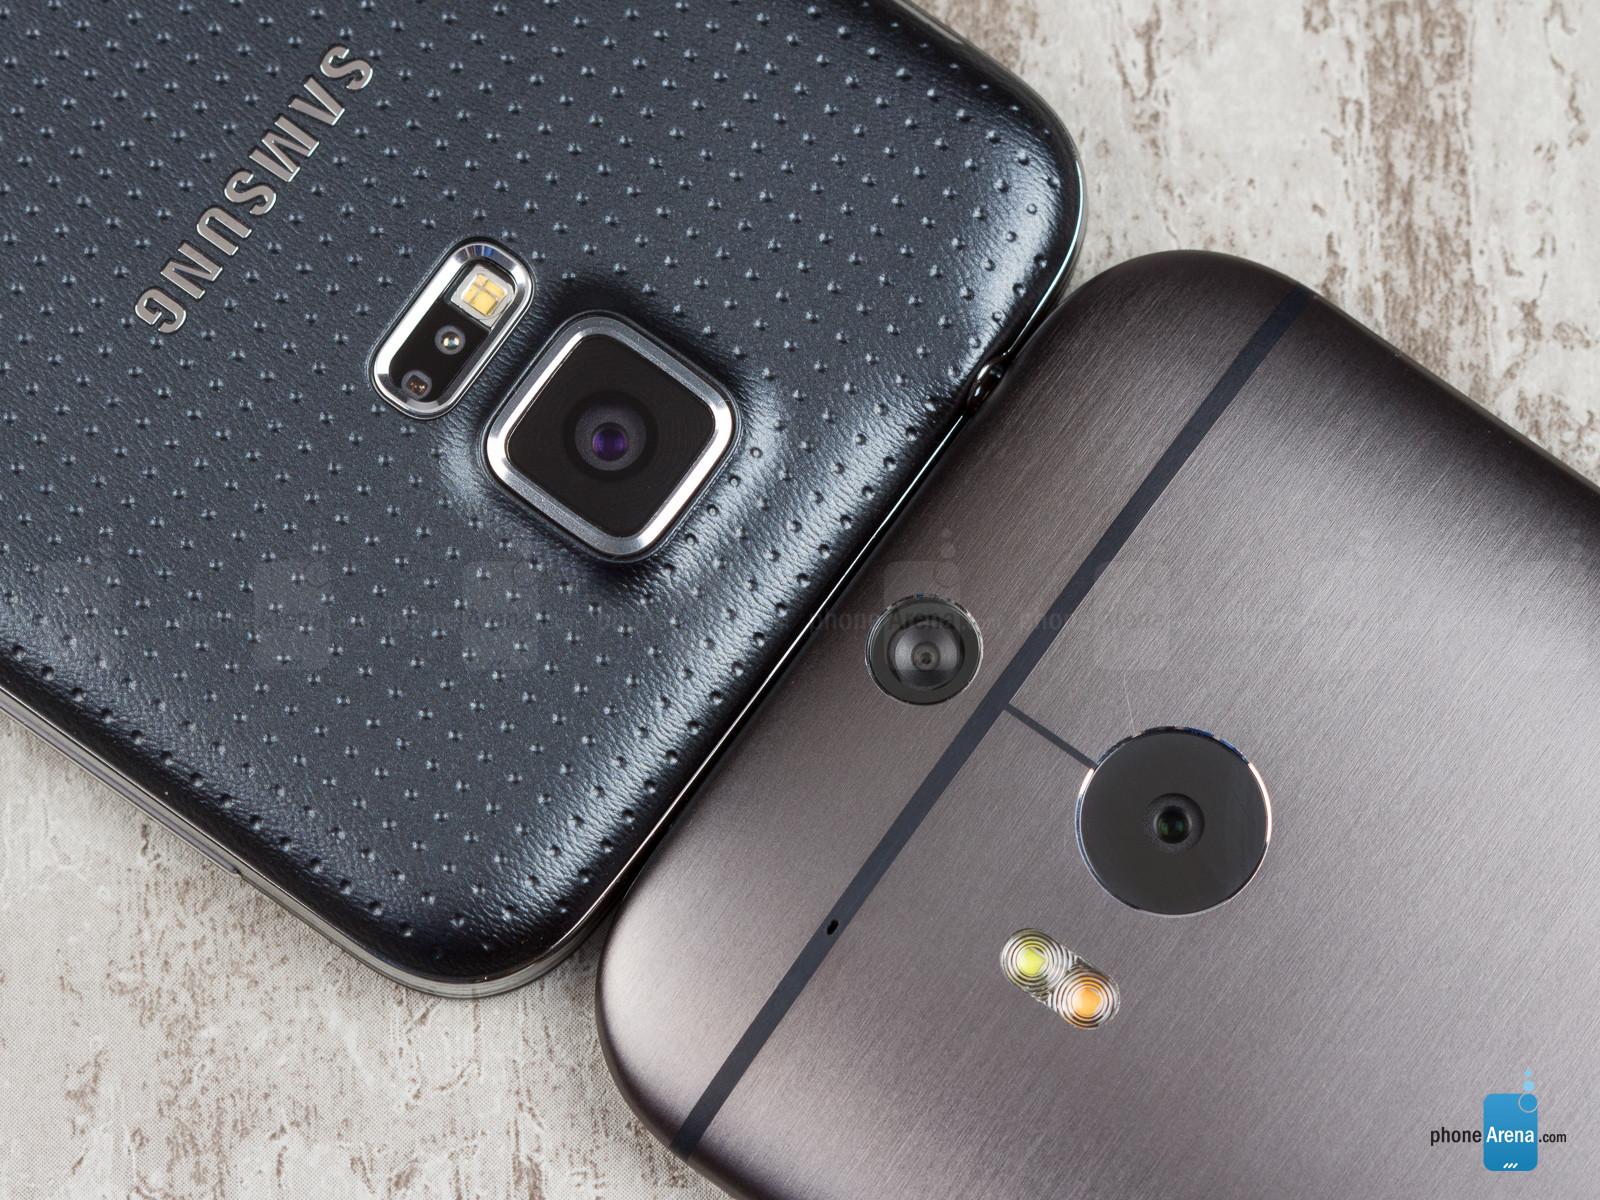 HTC exec talks about the Galaxy S5, says 8 million people watched the One M8 being announced